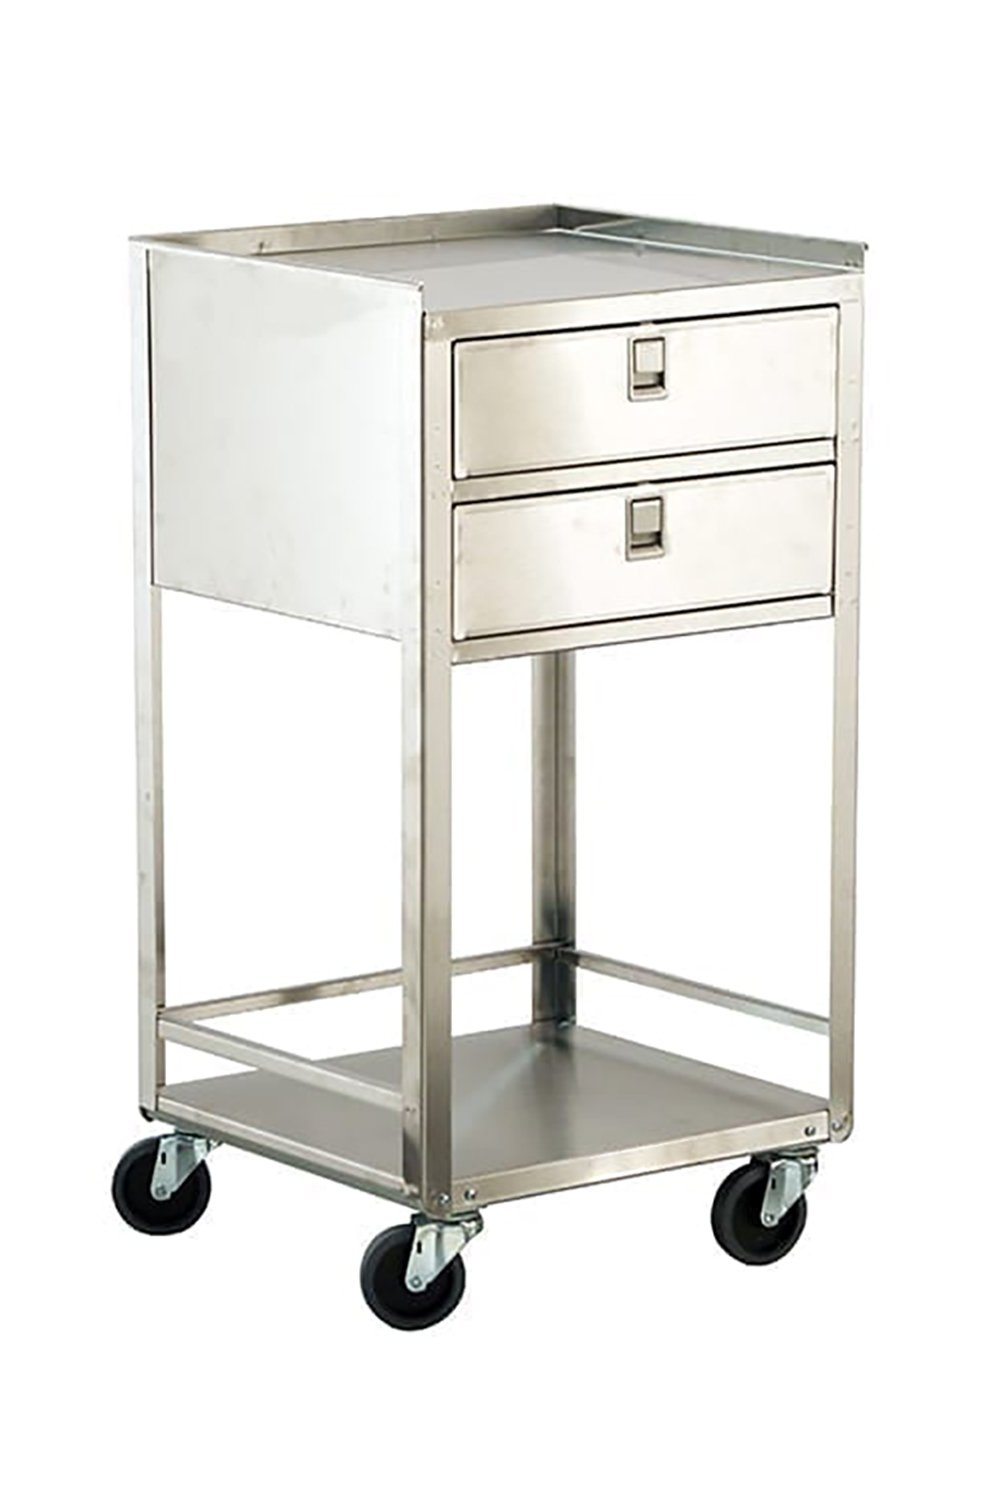 Stainless Steel Equipment/Utility Stand Stainless Solutions Lakeside 18 3/4" x 17 1/8" x 35"H Two drawers, two shelves 300.0